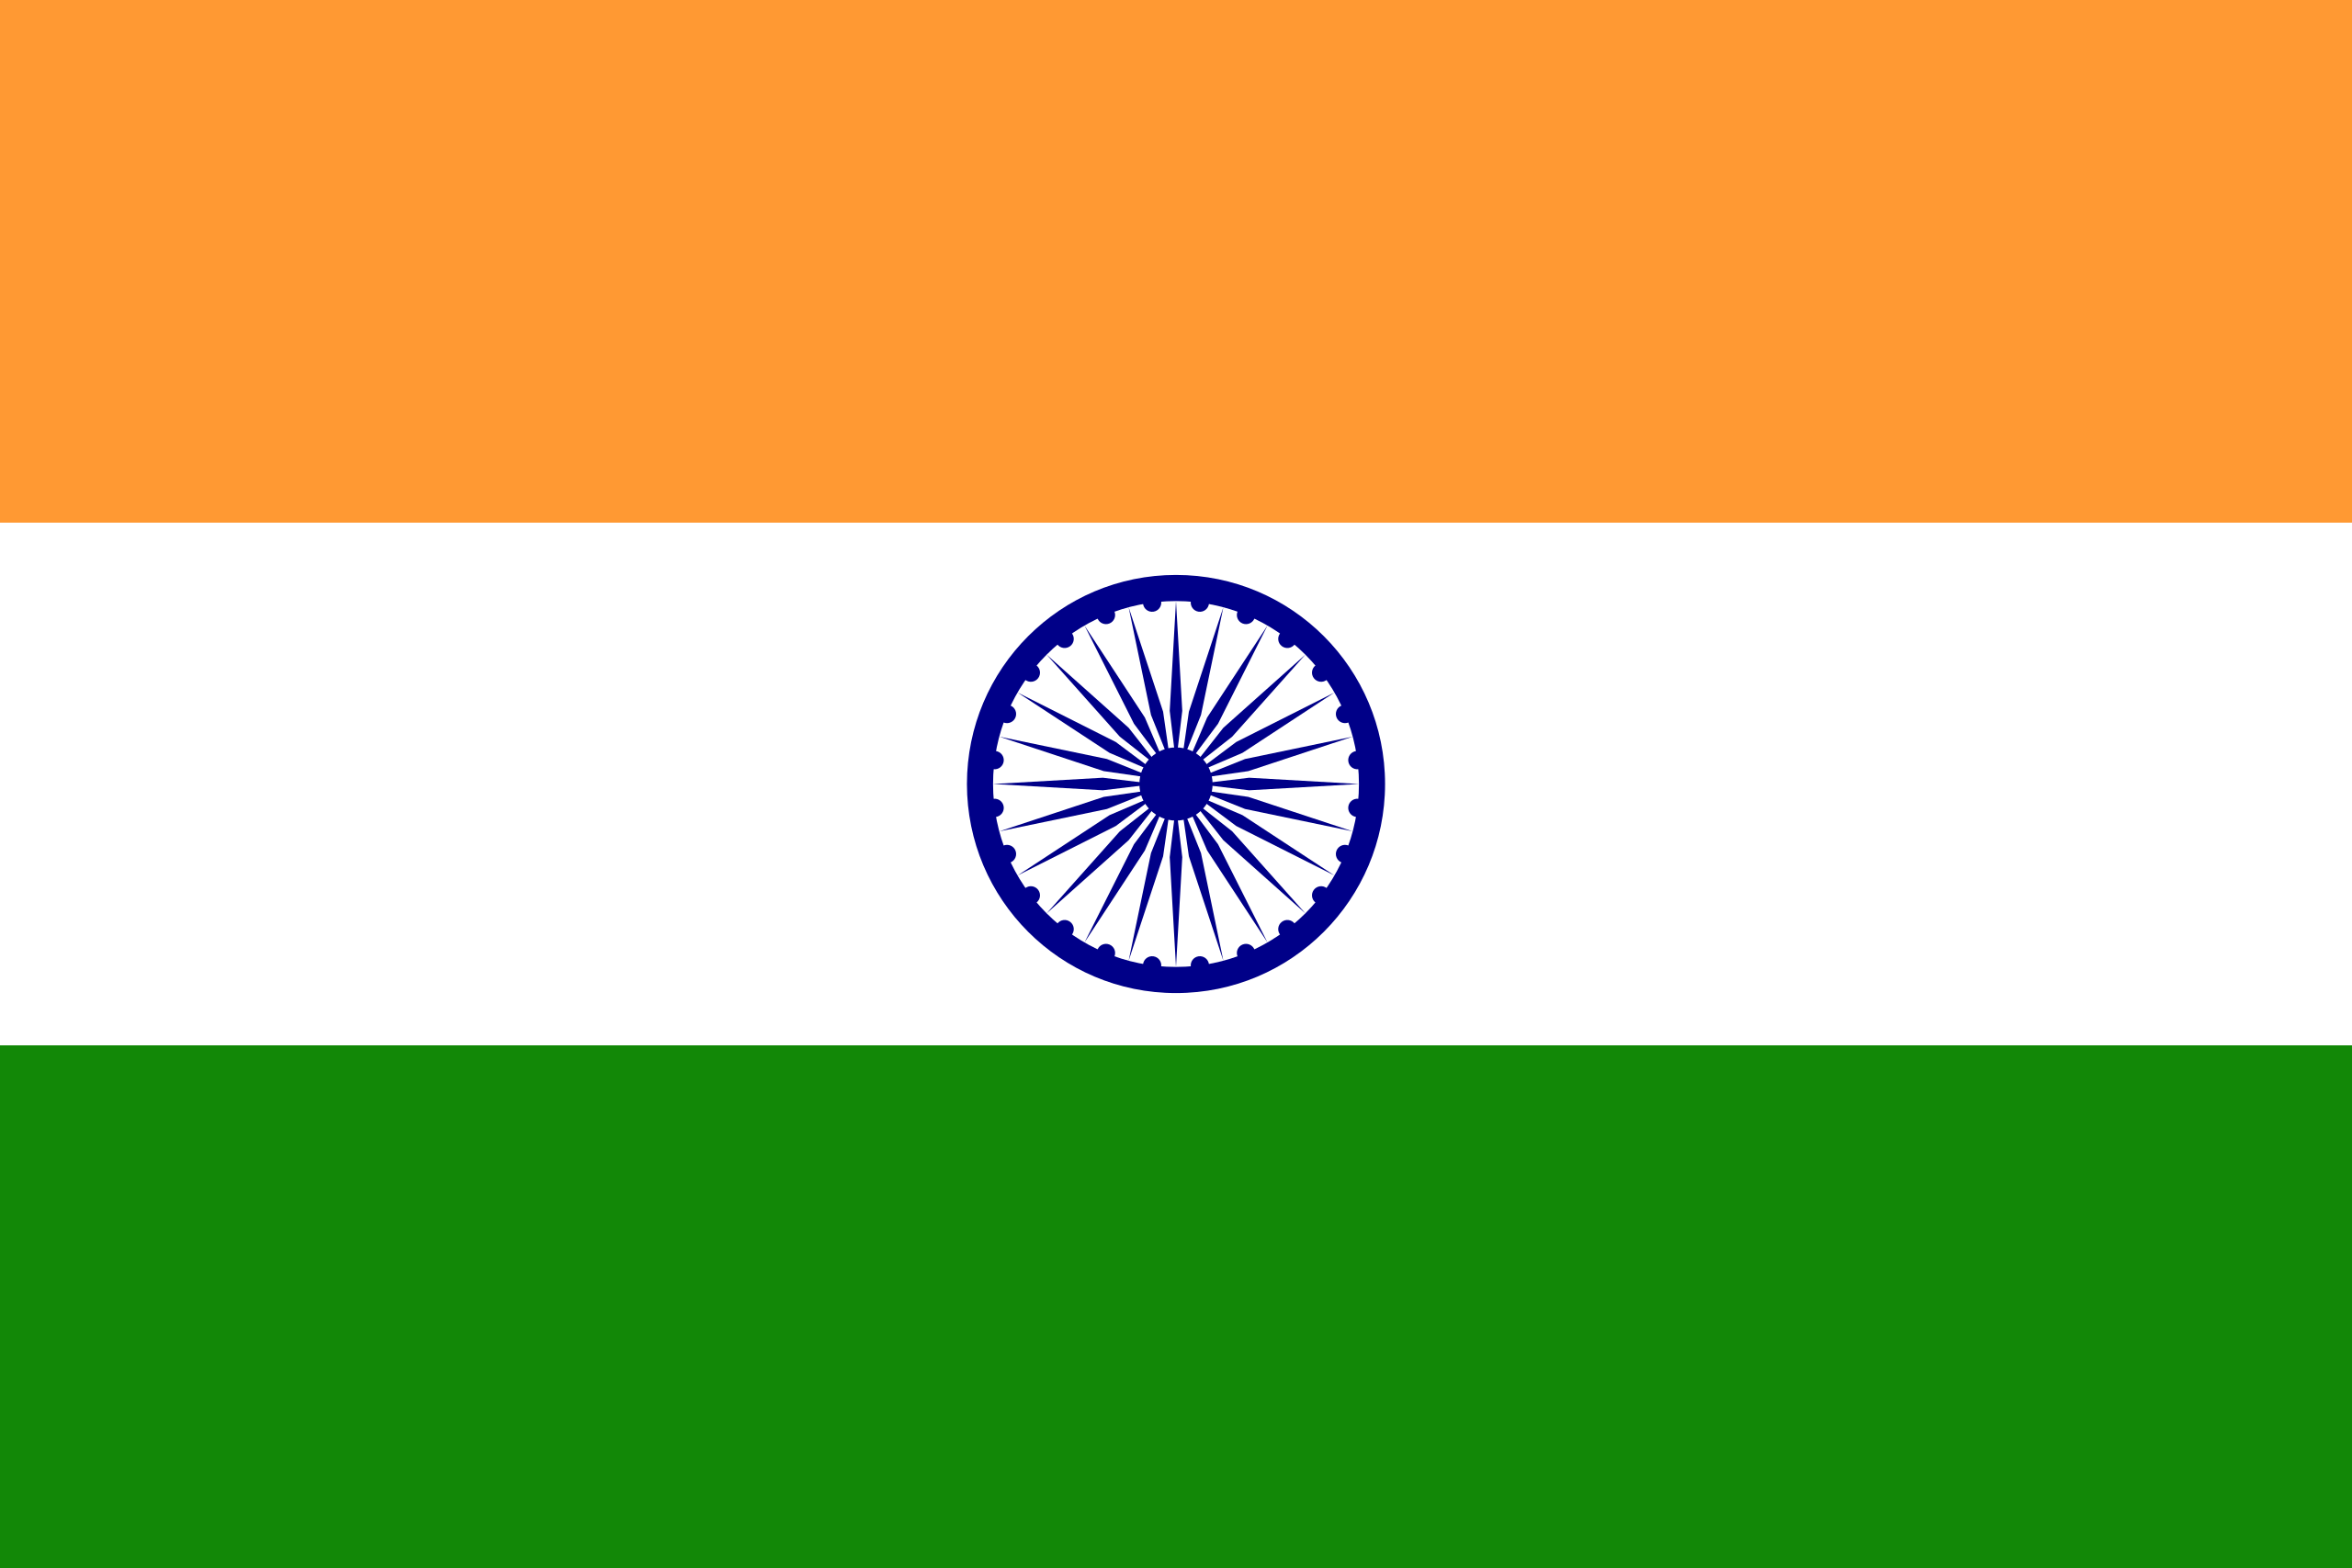 The official flag of India